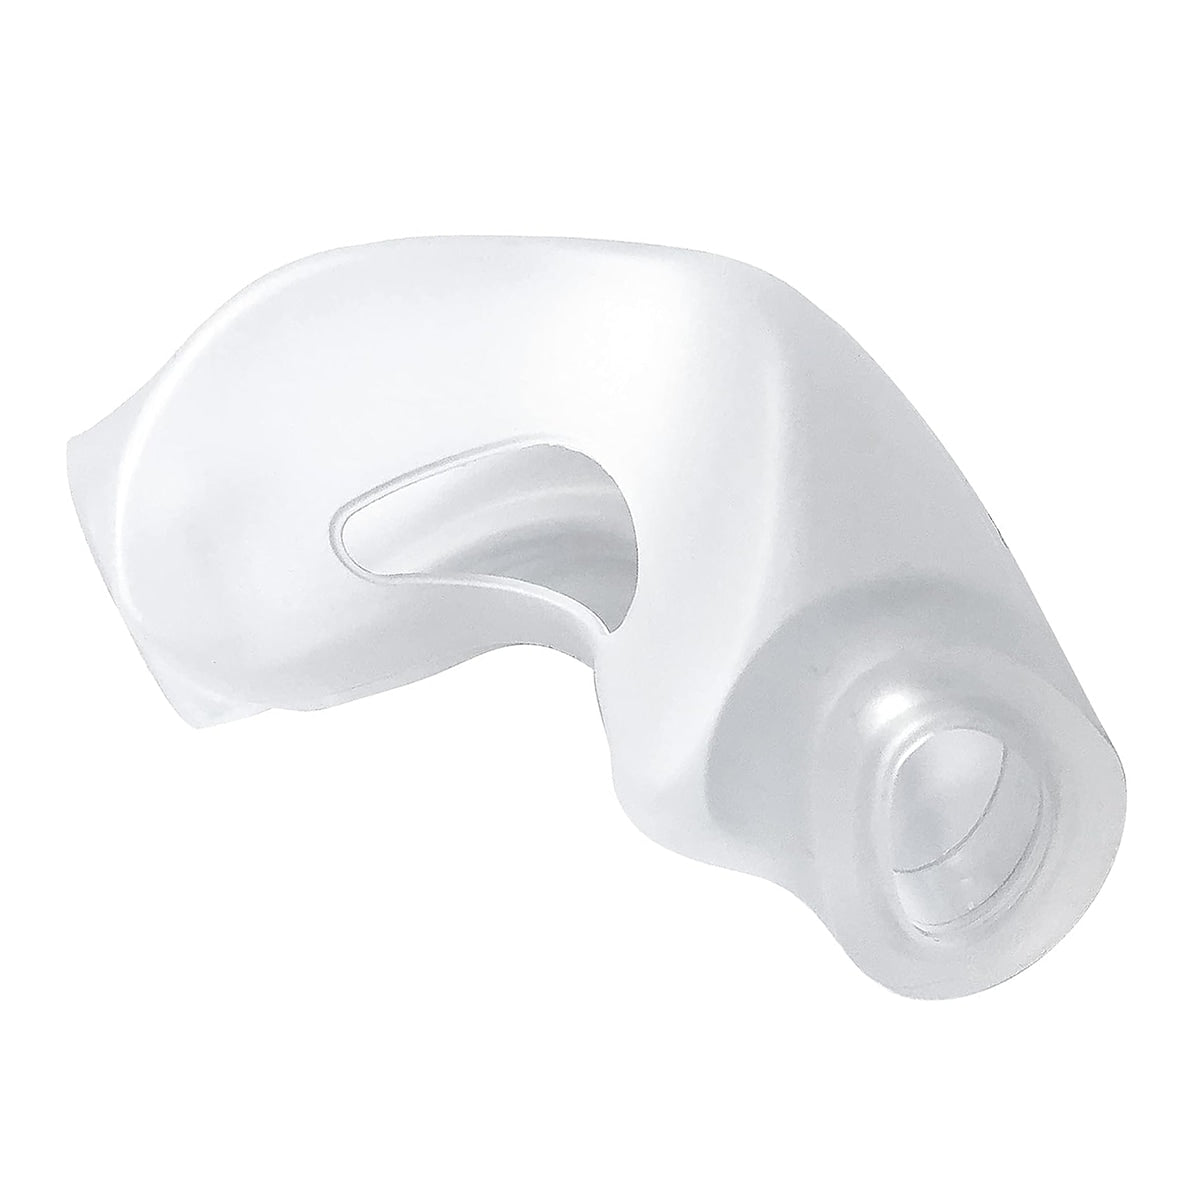 Respironics Dreamwear Nasal CPAP Mask  Nebulizers & CPAP Equipment and  Supplies – Only Nebulizers